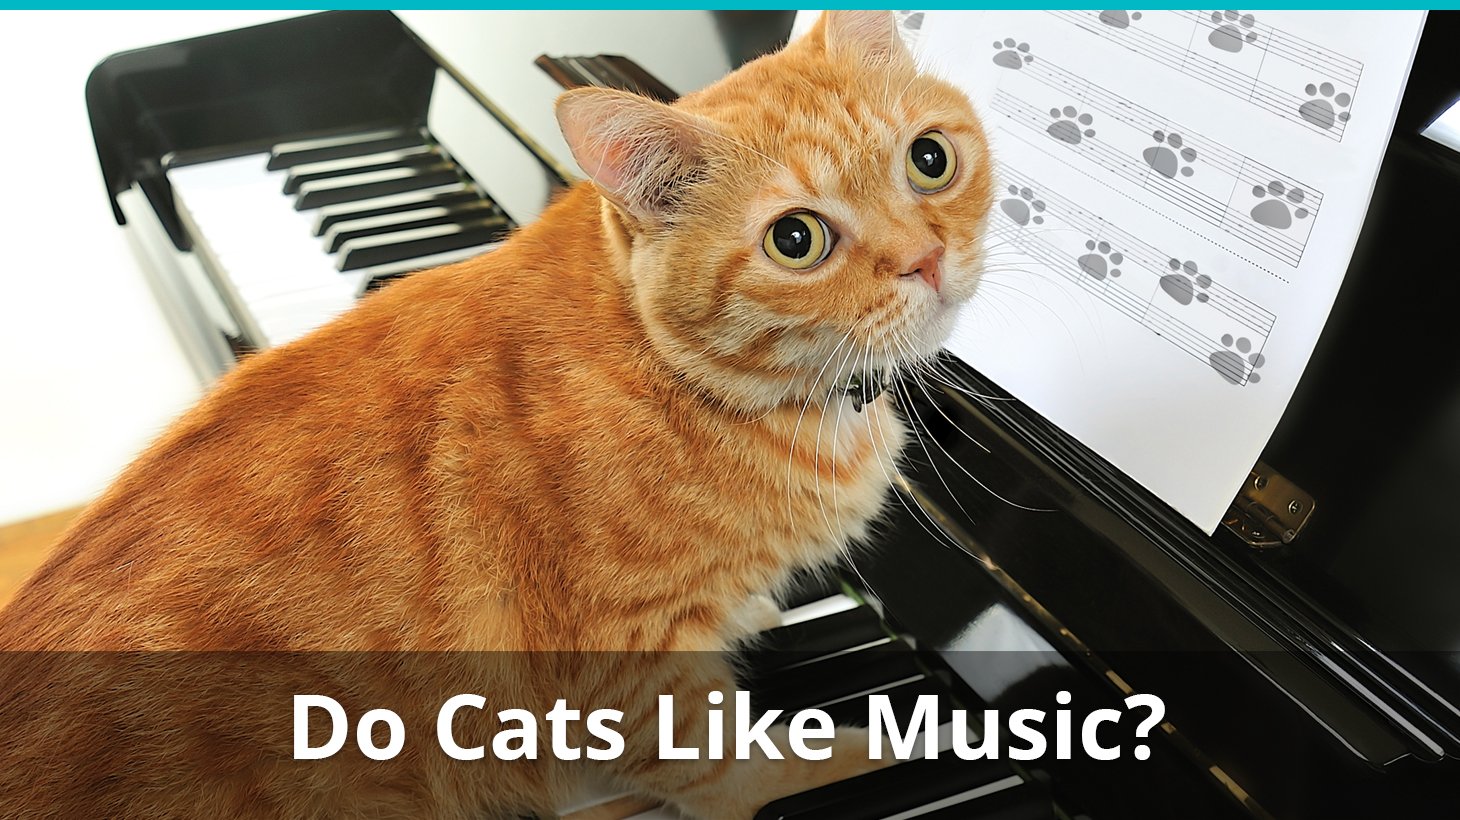 Do Cats Like Music What Type Do They Enjoy Music Made For Cats,Egg Roll Wrapper Recipe Ideas